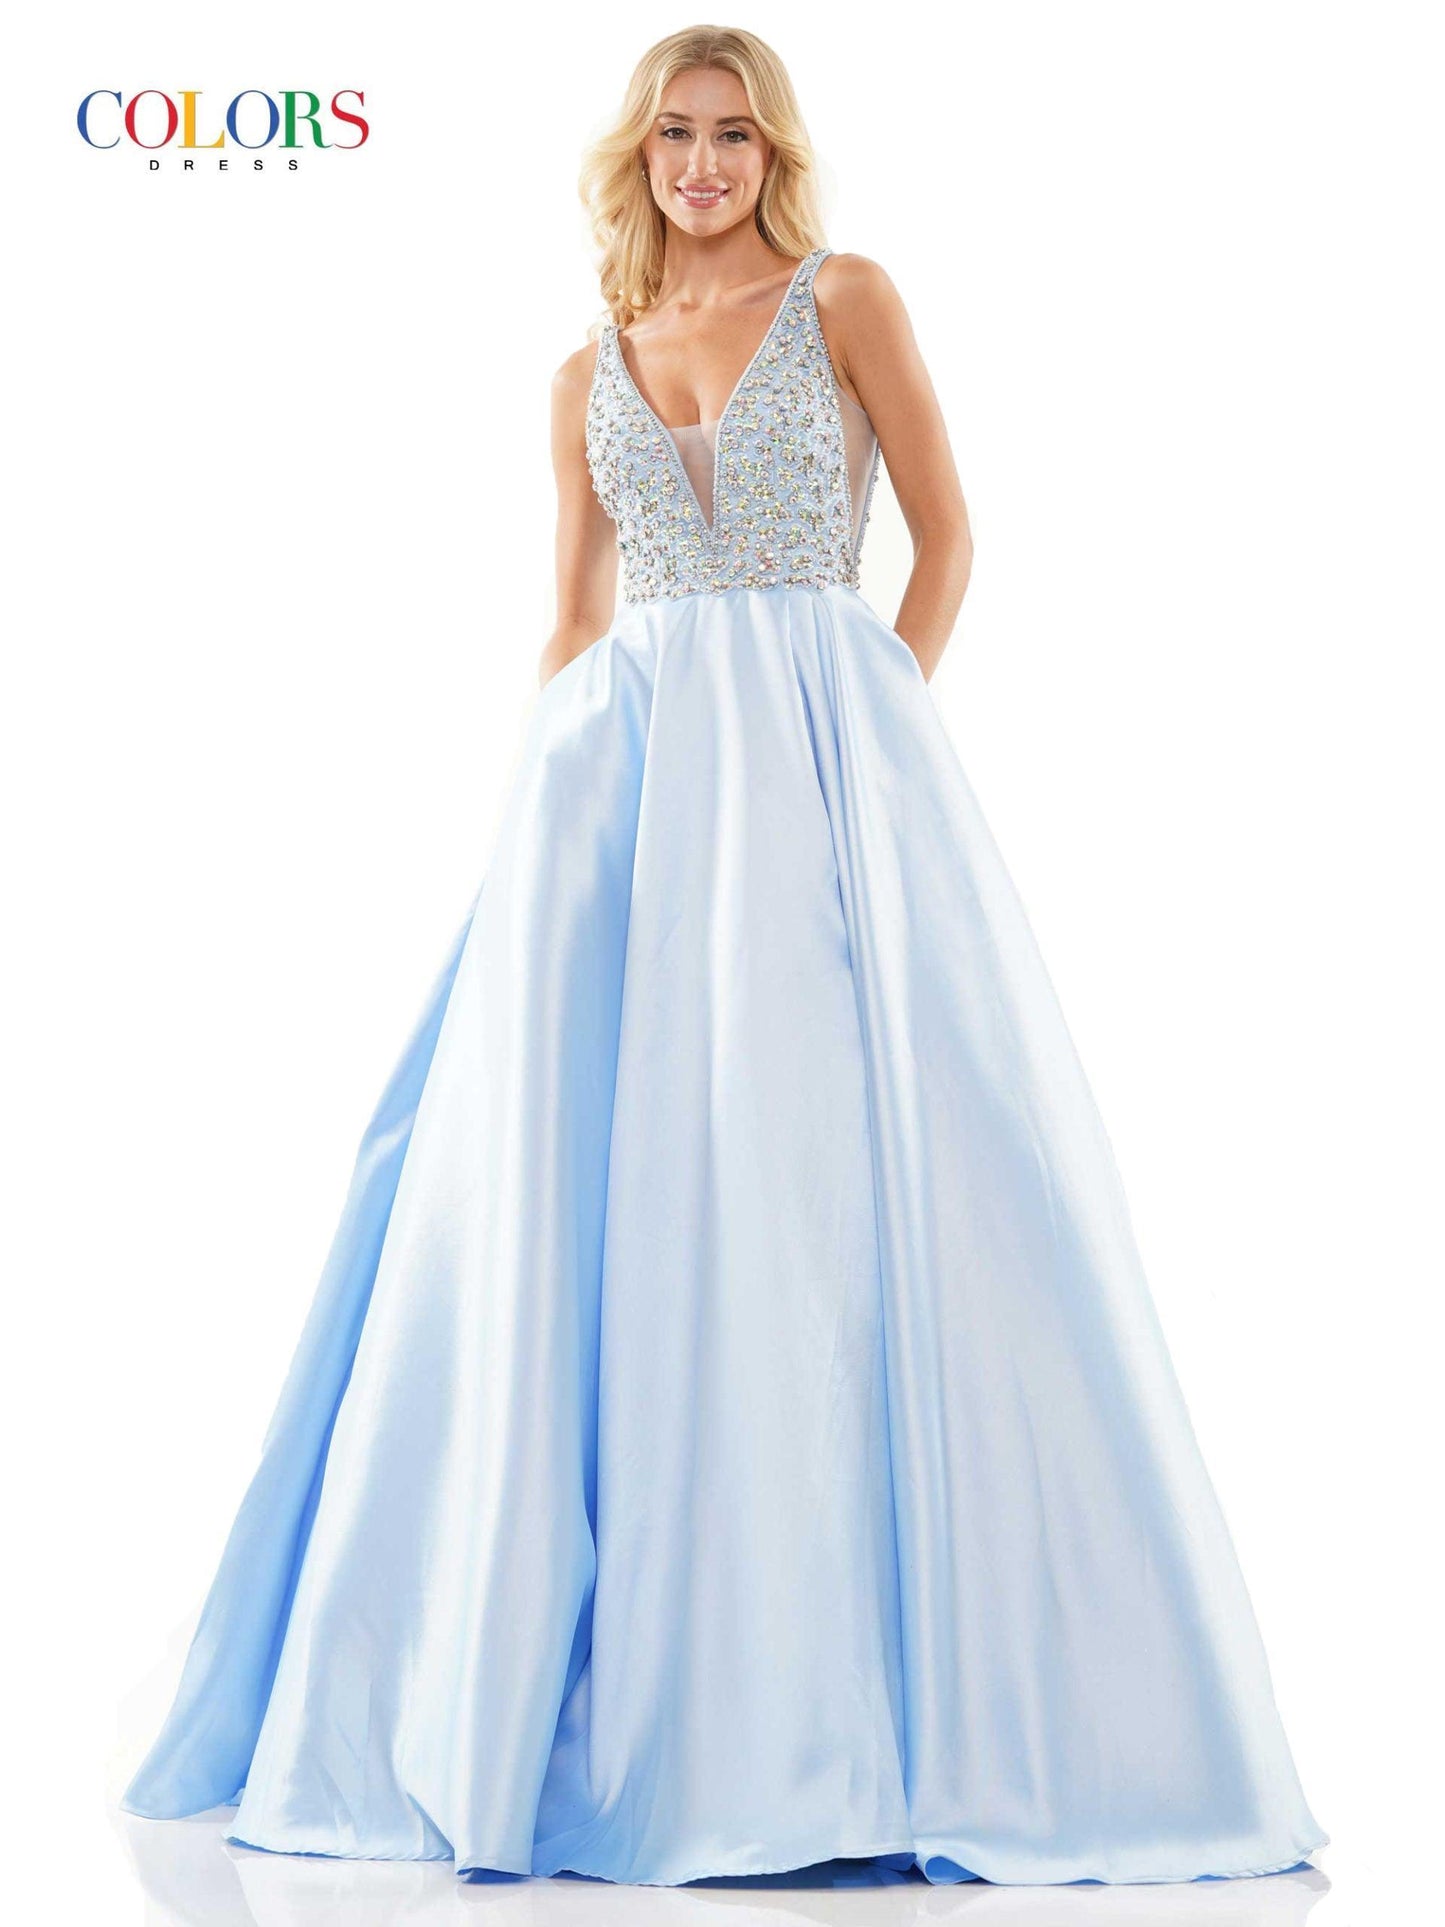 Colors Prom Long Sleeveless Dress - The Dress Outlet